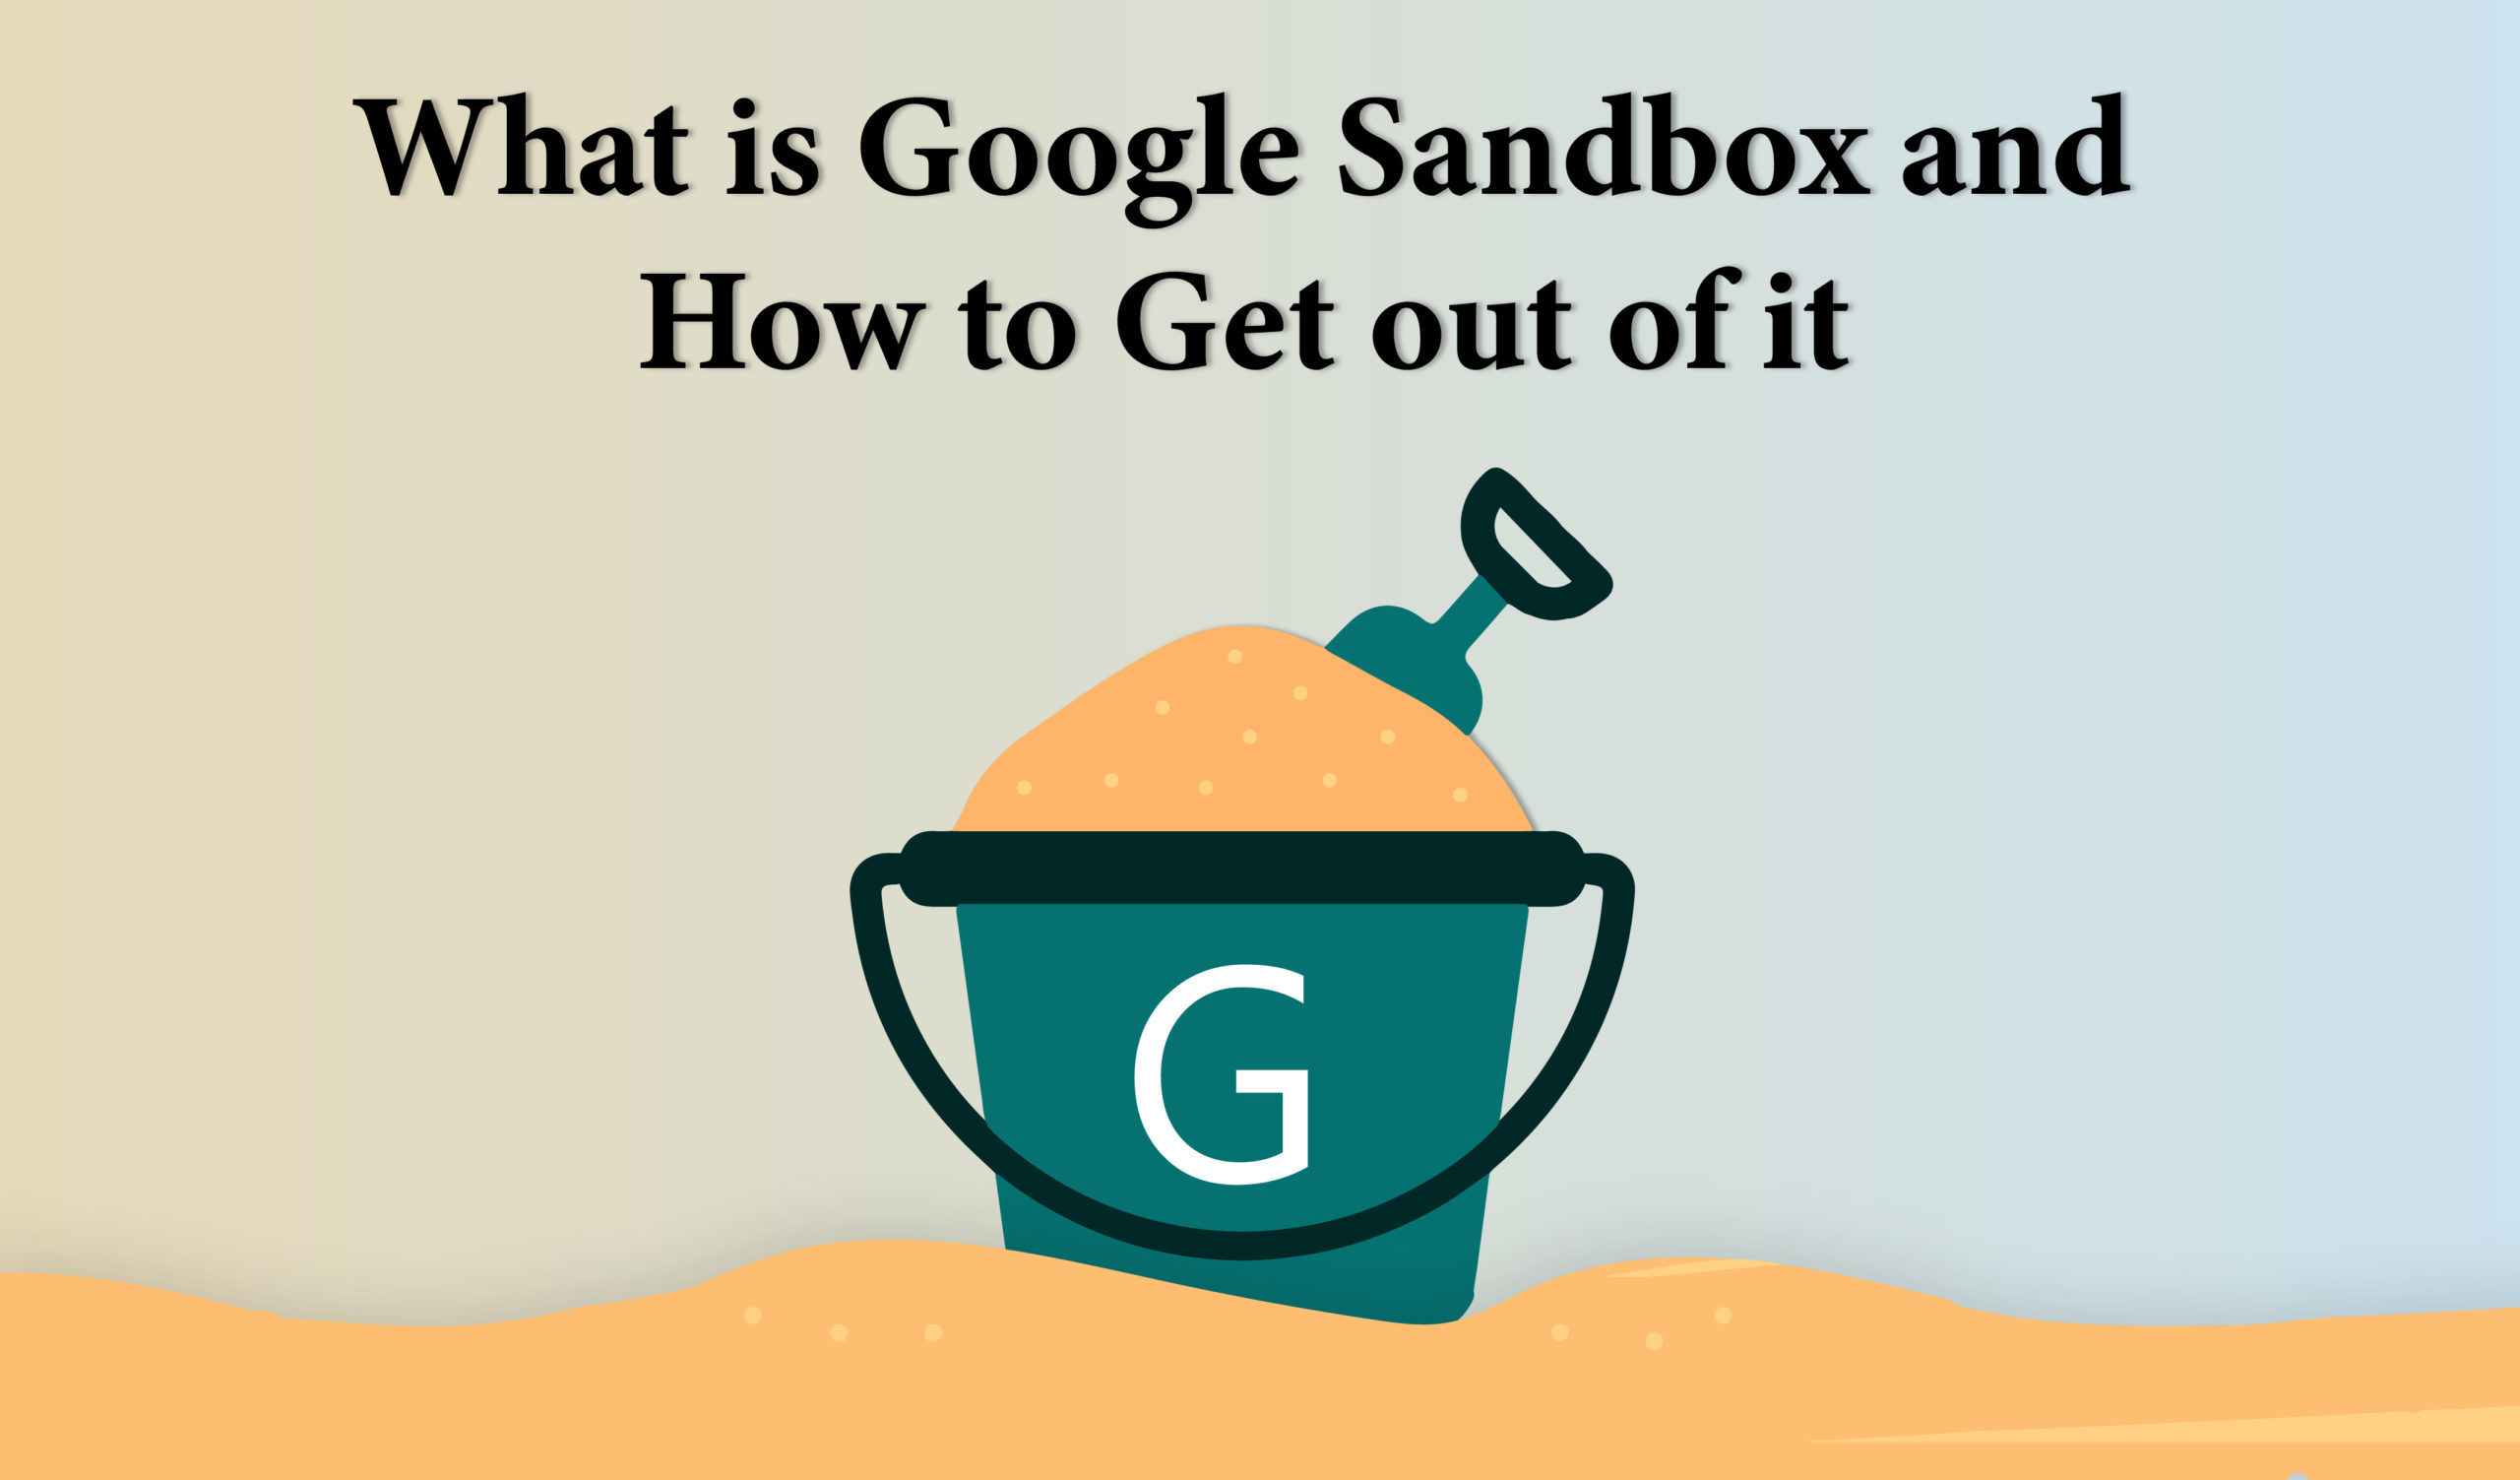 What is Google Sandbox and how to get out of it?